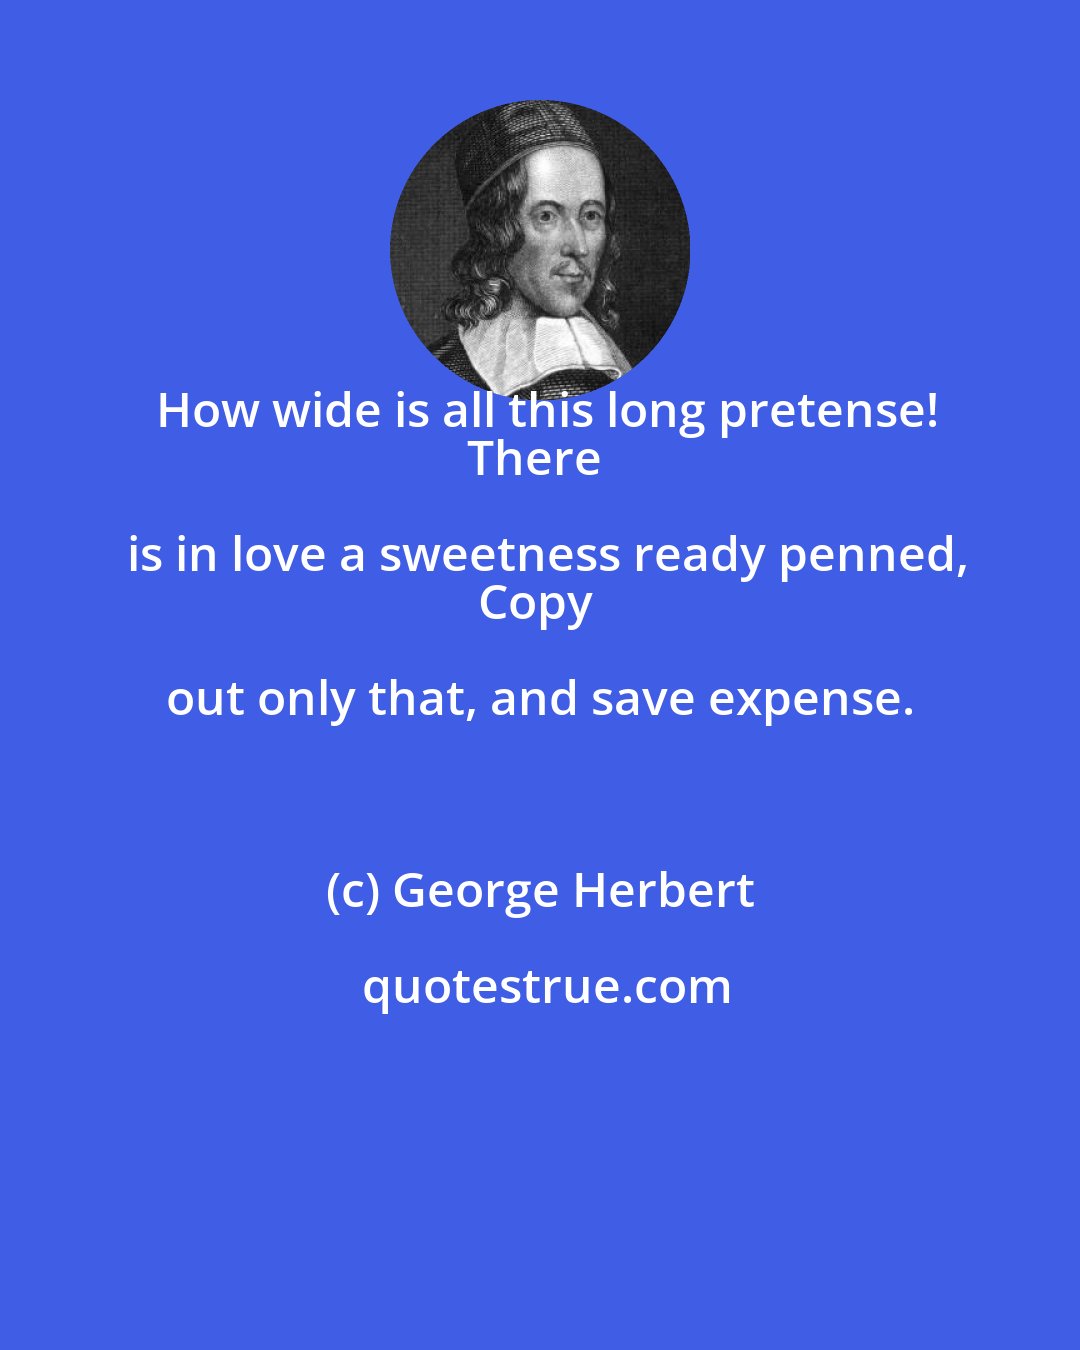 George Herbert: How wide is all this long pretense!
There is in love a sweetness ready penned,
Copy out only that, and save expense.